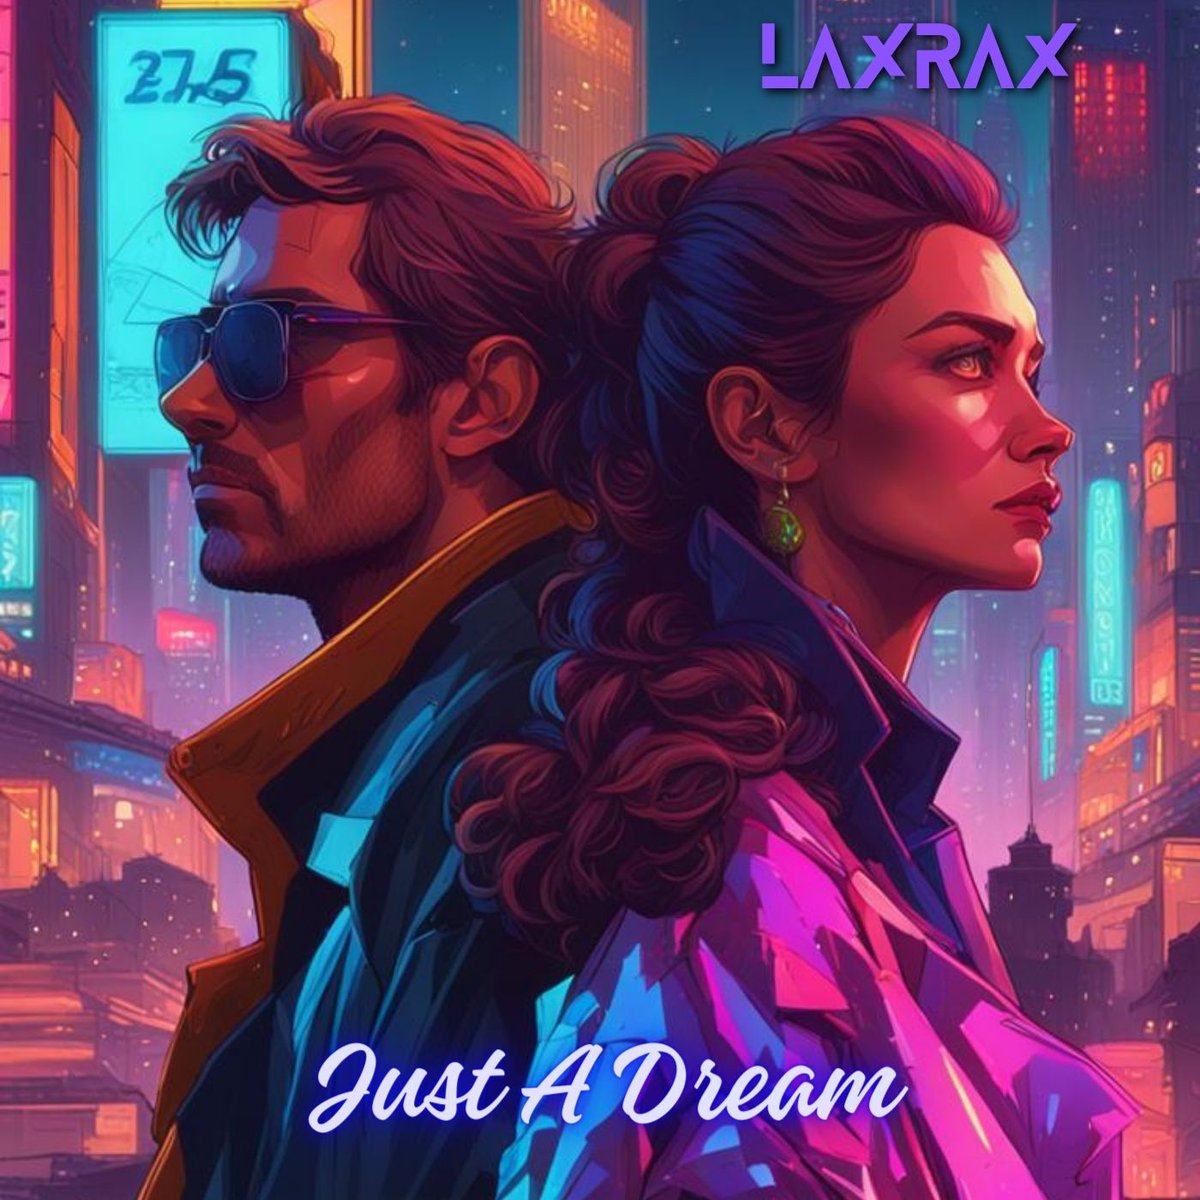 I had a blast producing my latest single Just A Dream. Can't get enough of these retro vibes right now! #Retro #Synthpop #Retropop #Dancepop #Synth #RetroVibes